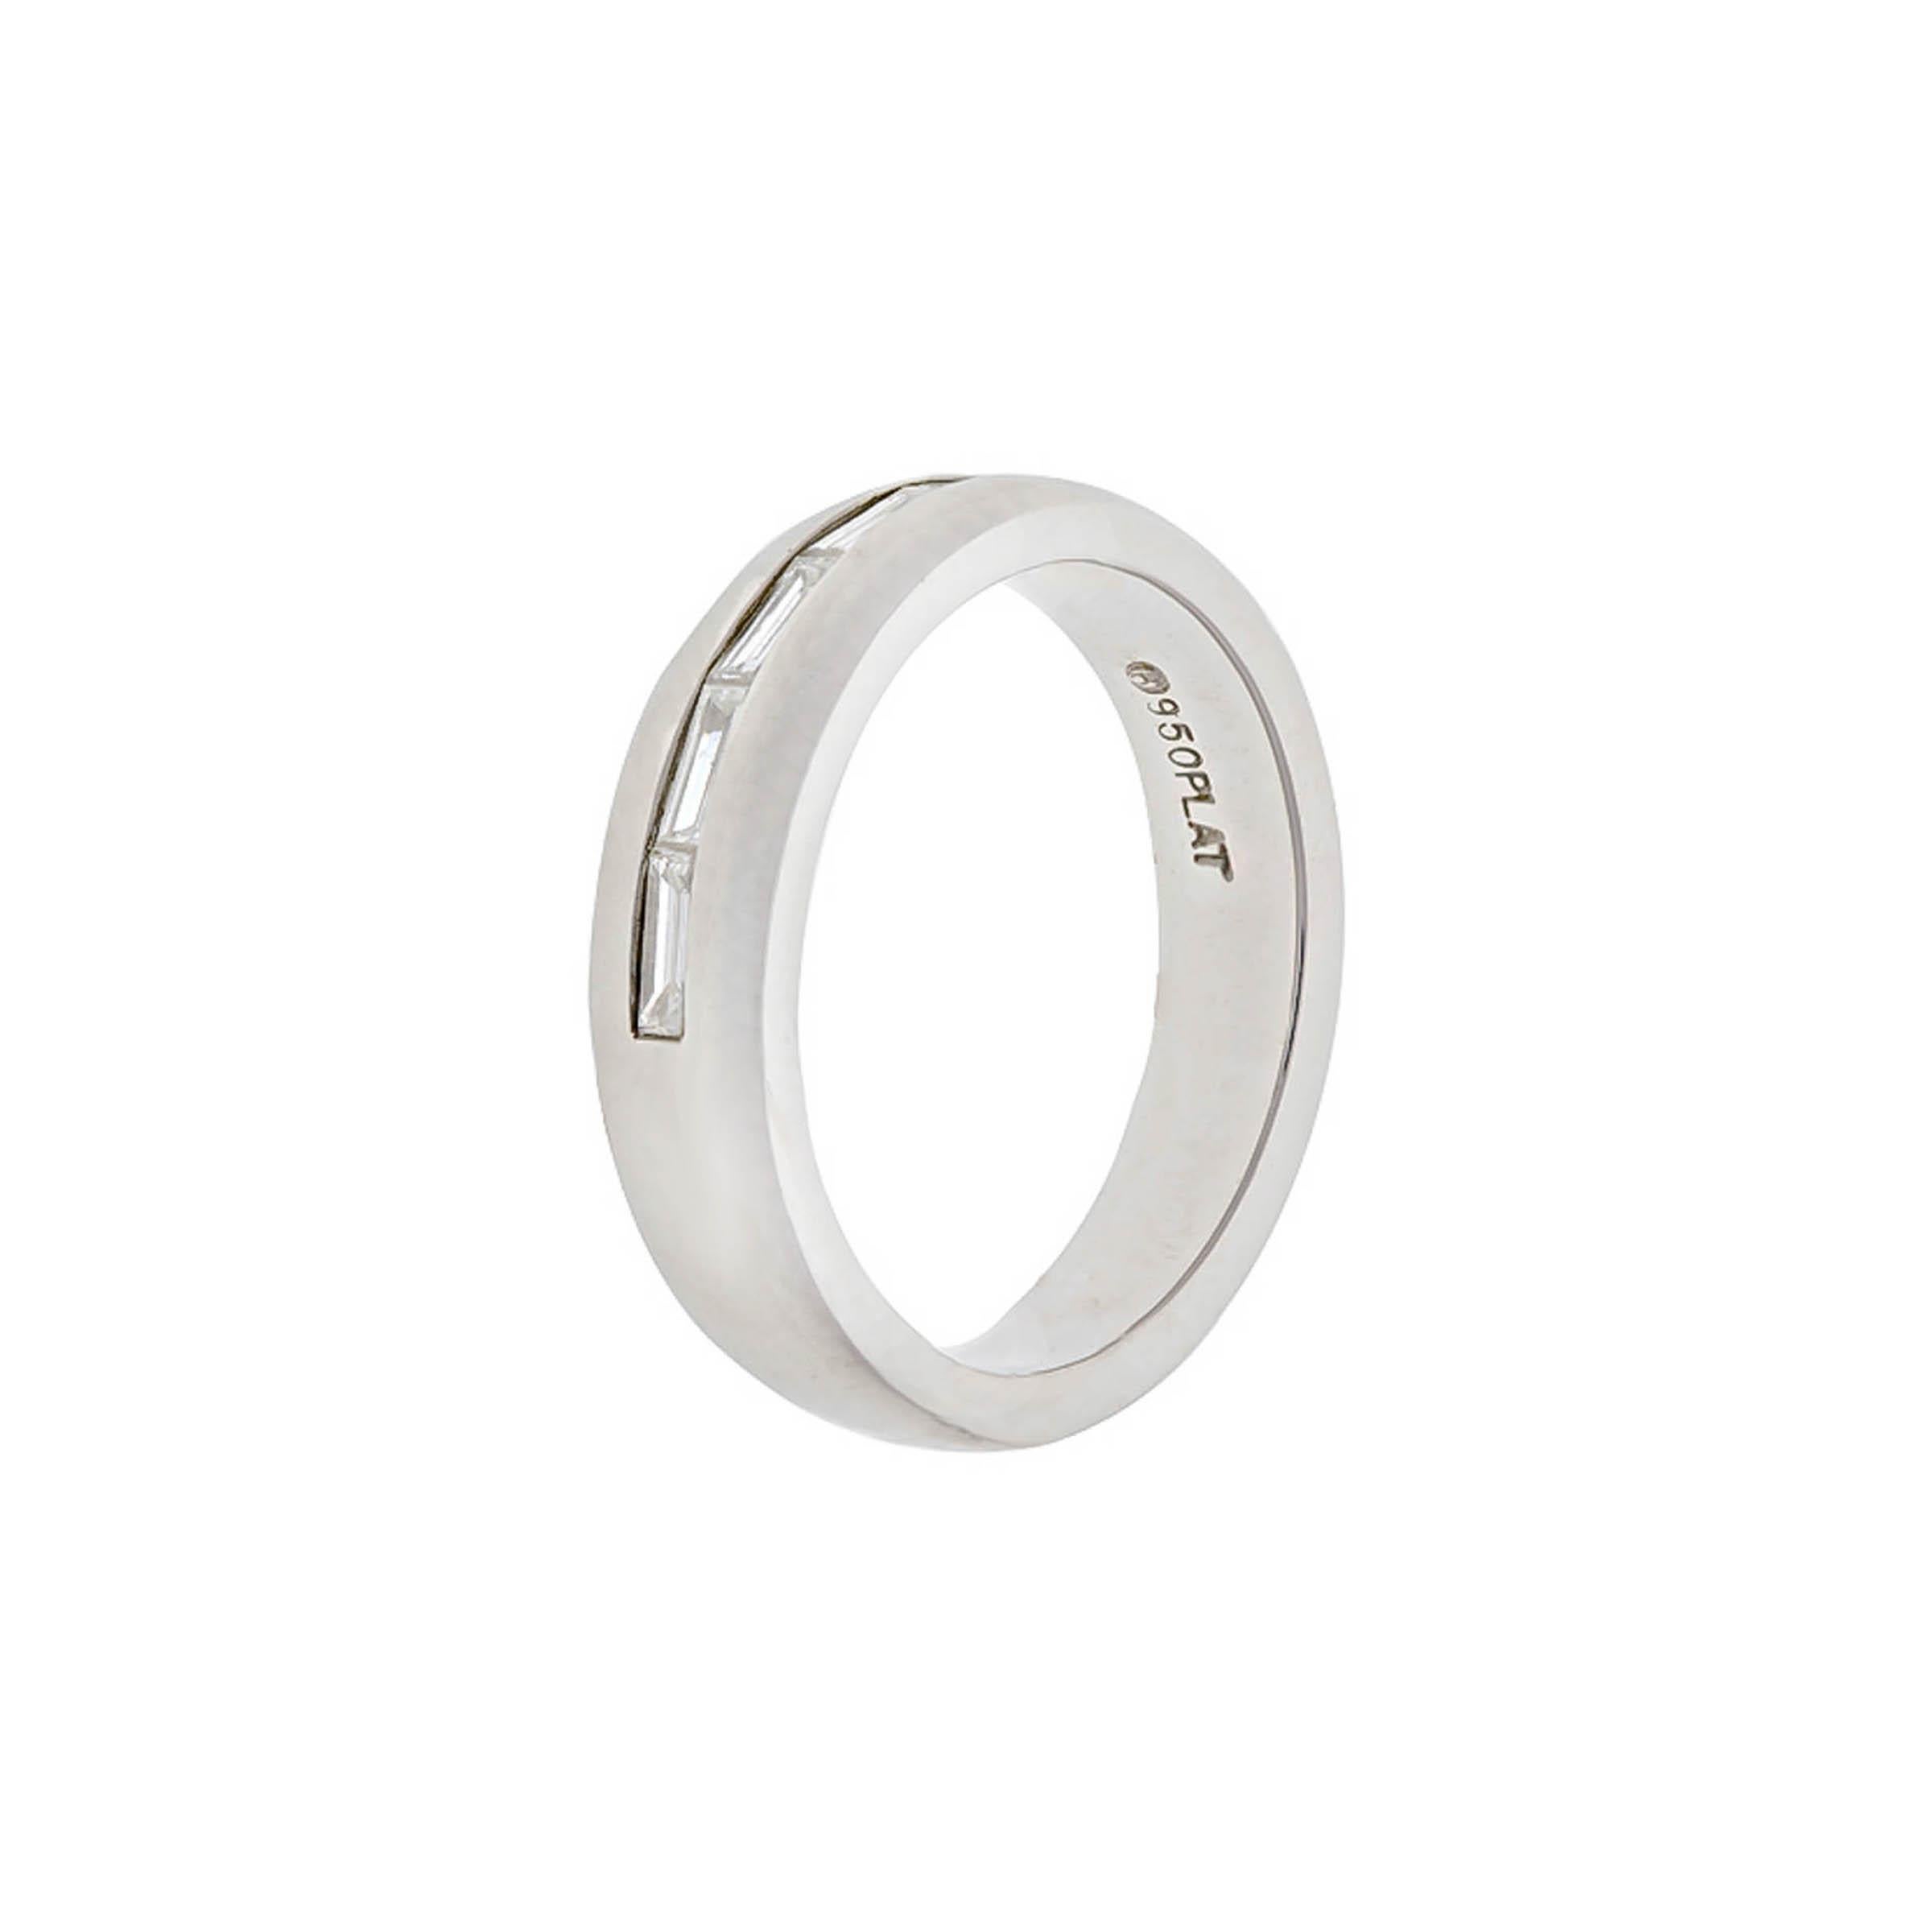 Platinum wedding band containing five baguette diamonds weighing combined 0.66 carat. G color, VS clarity.